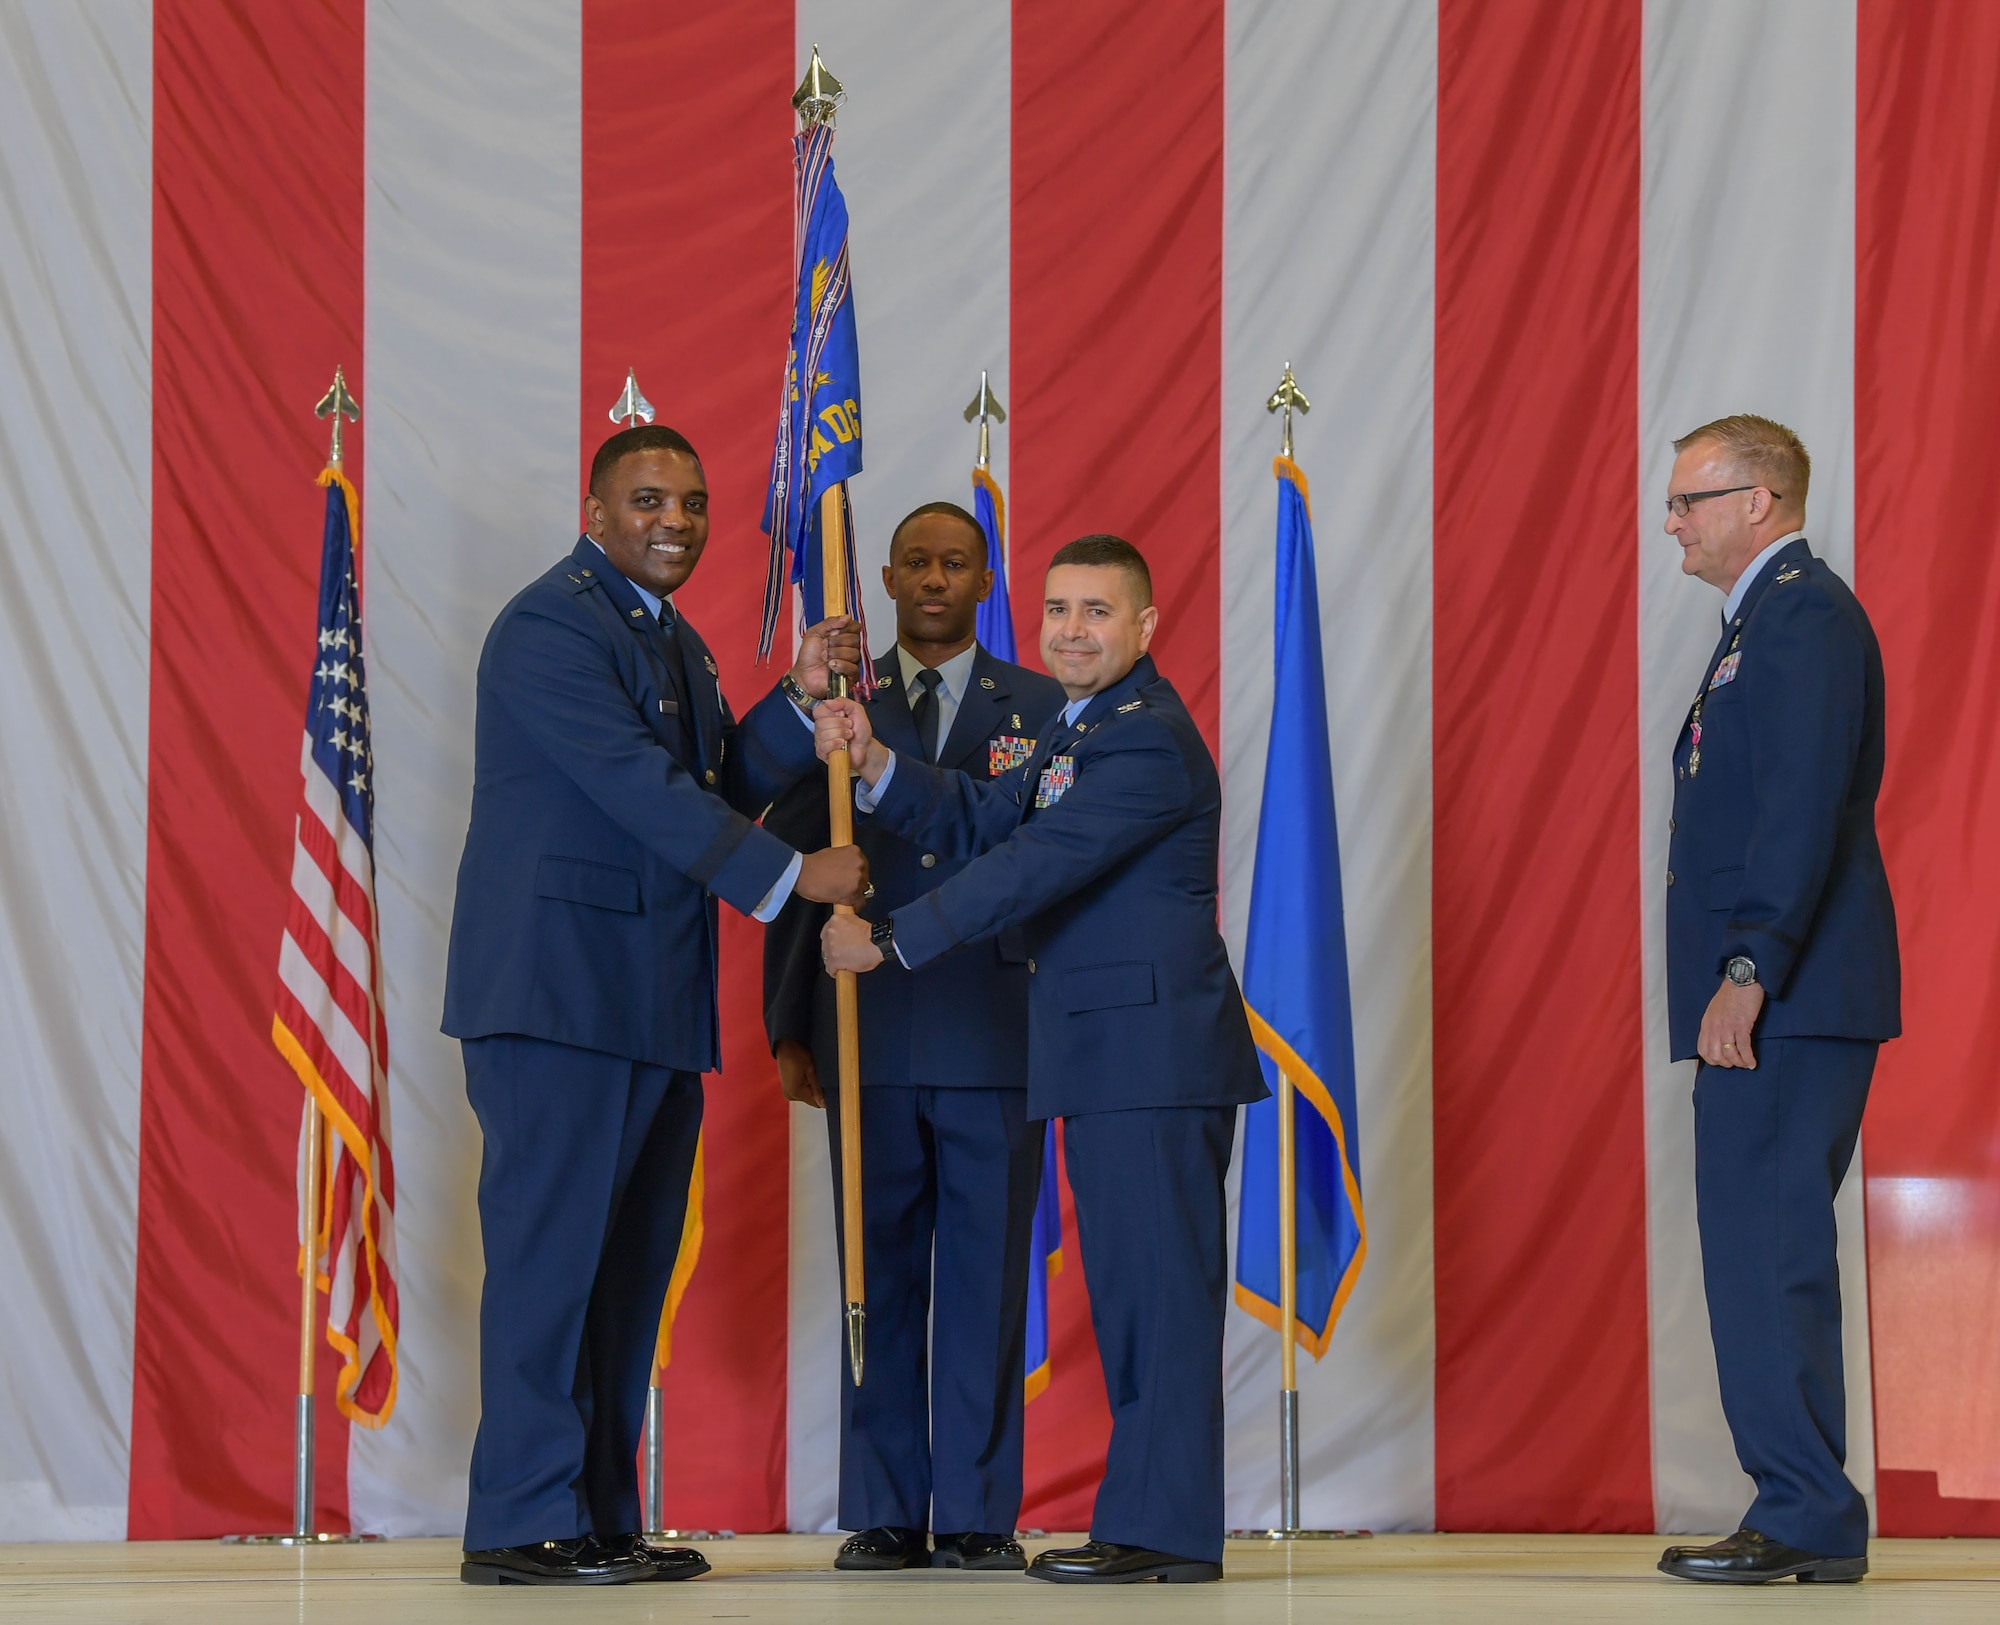 U.S. Air Force Brig. Gen. Otis C. Jones, left, 86th Airlift Wing commander, passes a guidon to Col. Dwayne Baca, right, 86th Medical Group incoming commander, during the 86th MDG change of command ceremony at Ramstein Air Base, Germany, July 6, 2023. The 86th MDG is accountable for community health care services to 56,000 in the Kaiserslautern Military Community. (U.S. Air Force photo by Airman Trevor Calvert)